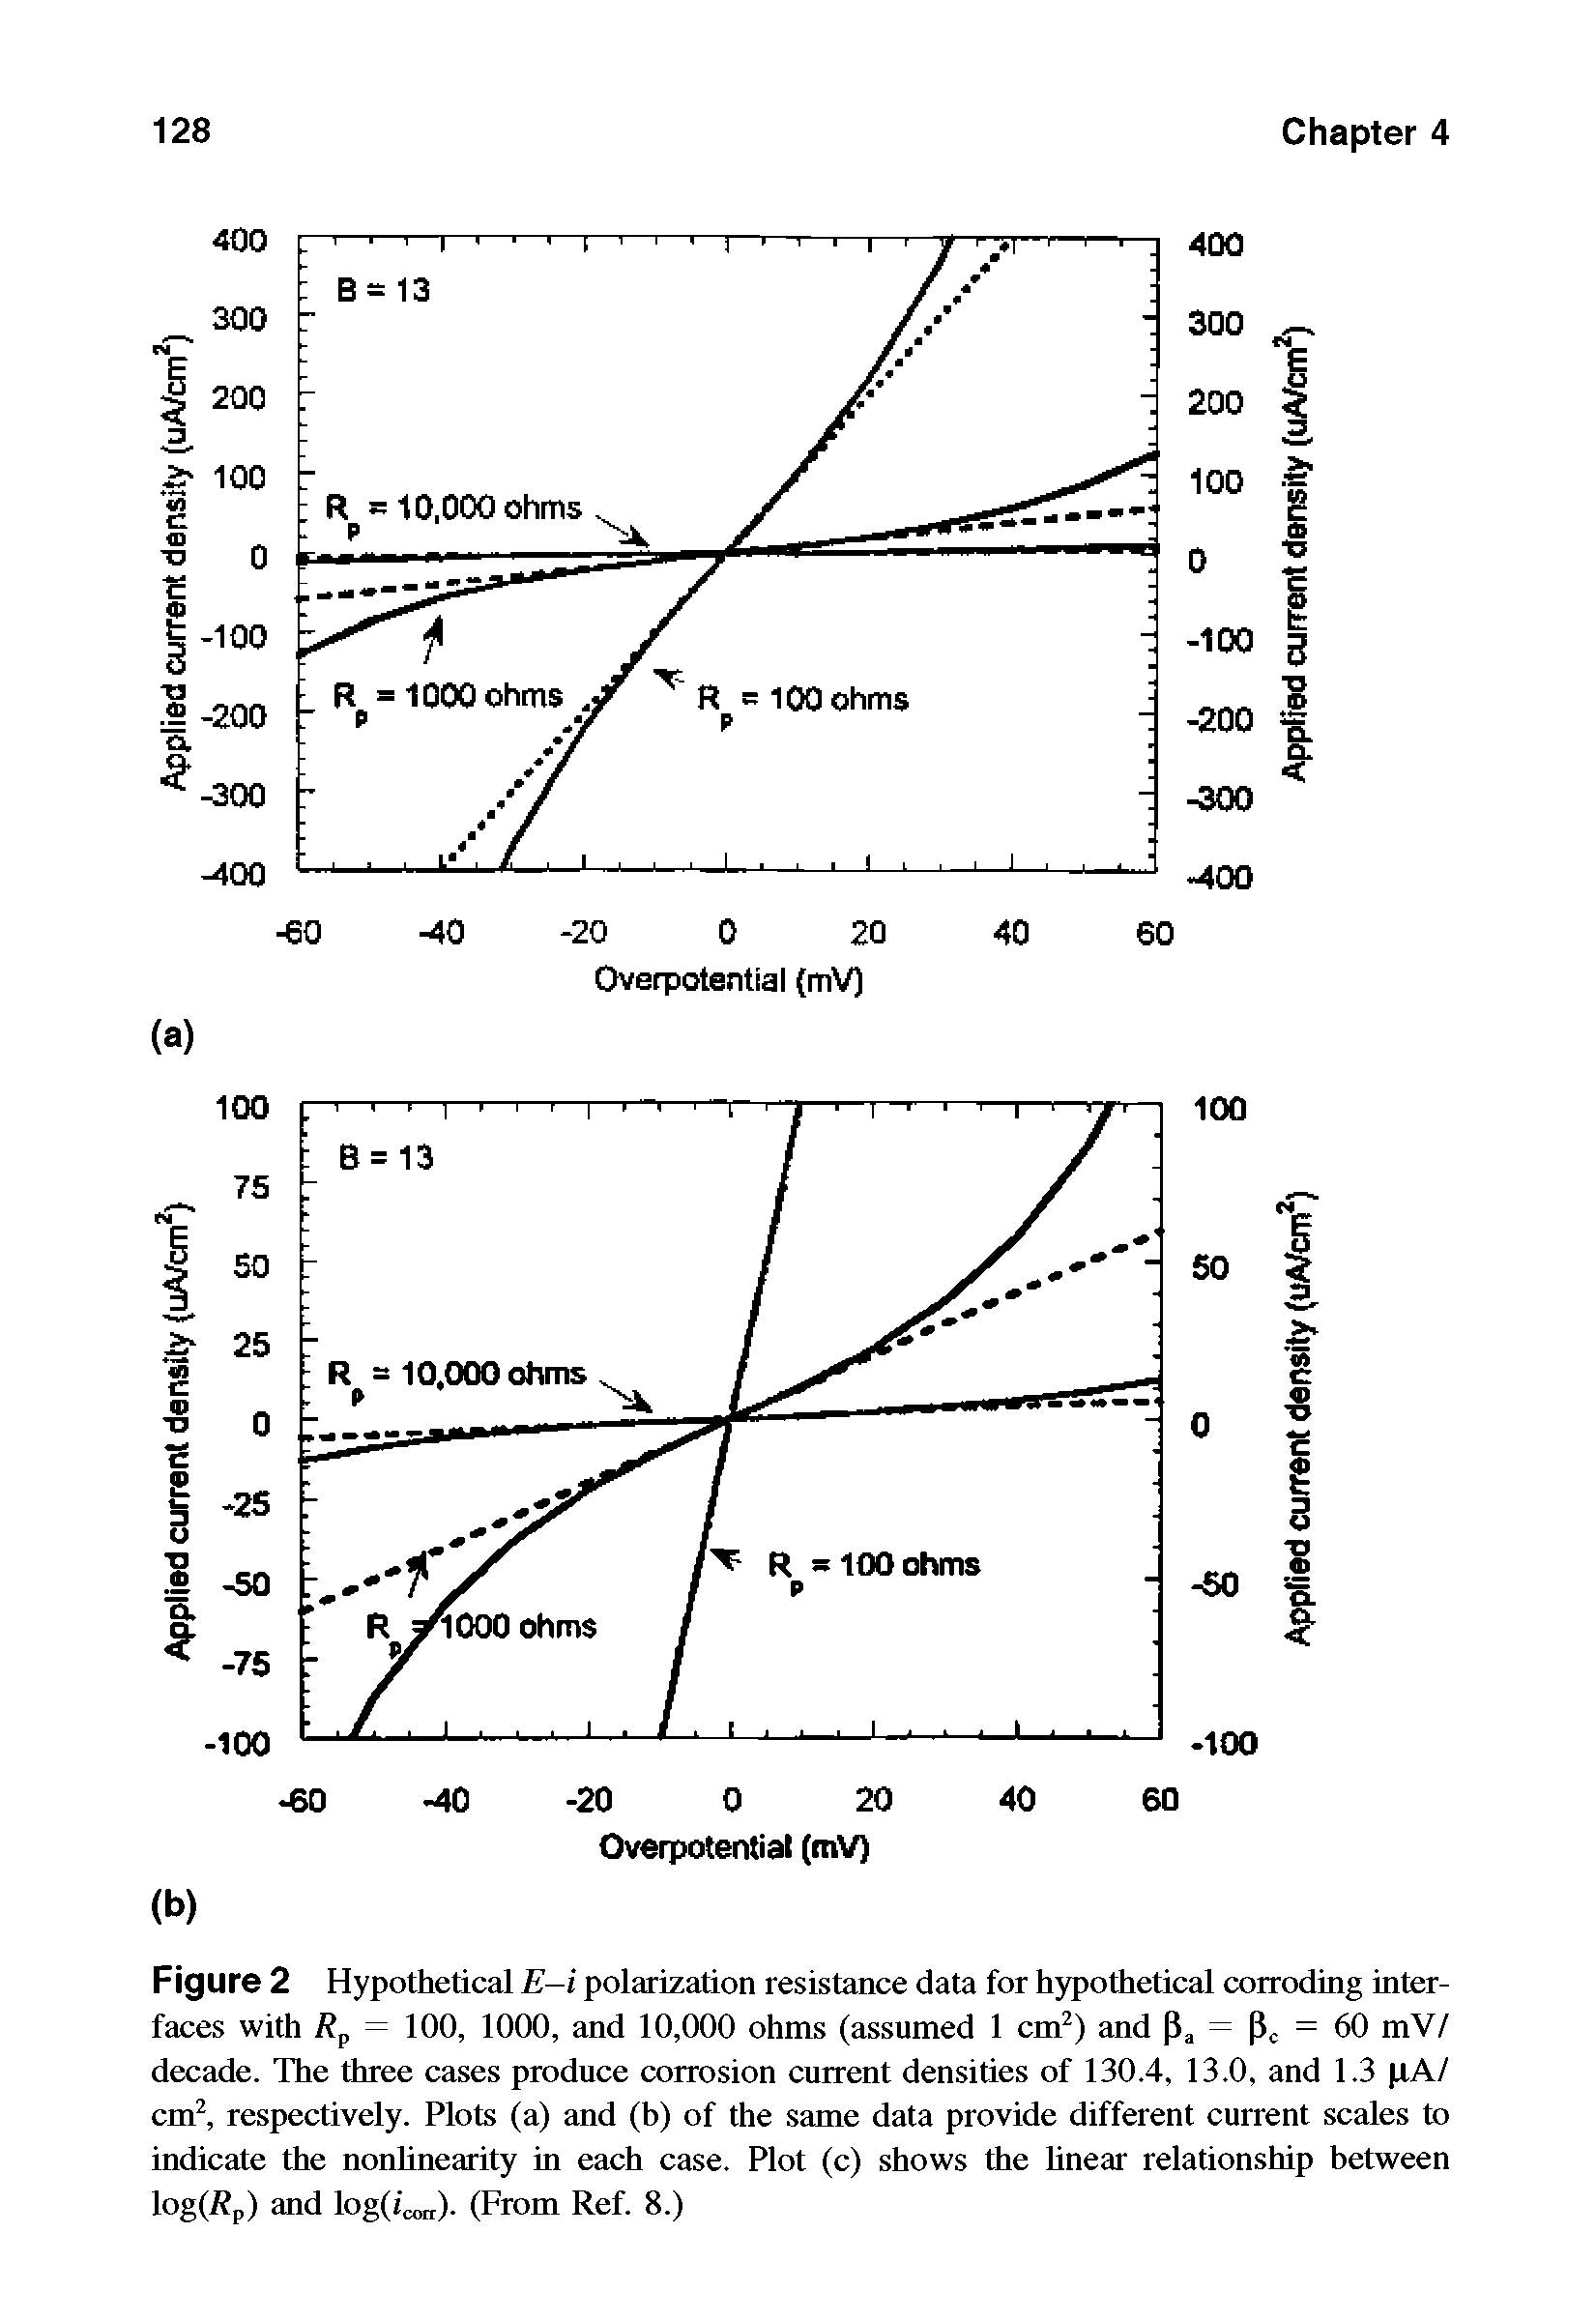 Figure 2 Hypothetical E—i polarization resistance data for hypothetical corroding interfaces with Rp = 100, 1000, and 10,000 ohms (assumed 1 cm2) and [T, [ic = 60 mV/ decade. The three cases produce corrosion current densities of 130.4, 13.0, and 1.3 XA/ cm2, respectively. Plots (a) and (b) of the same data provide different current scales to indicate the nonlinearity in each case. Plot (c) shows the linear relationship between log///,) and log(/corr). (From Ref. 8.)...